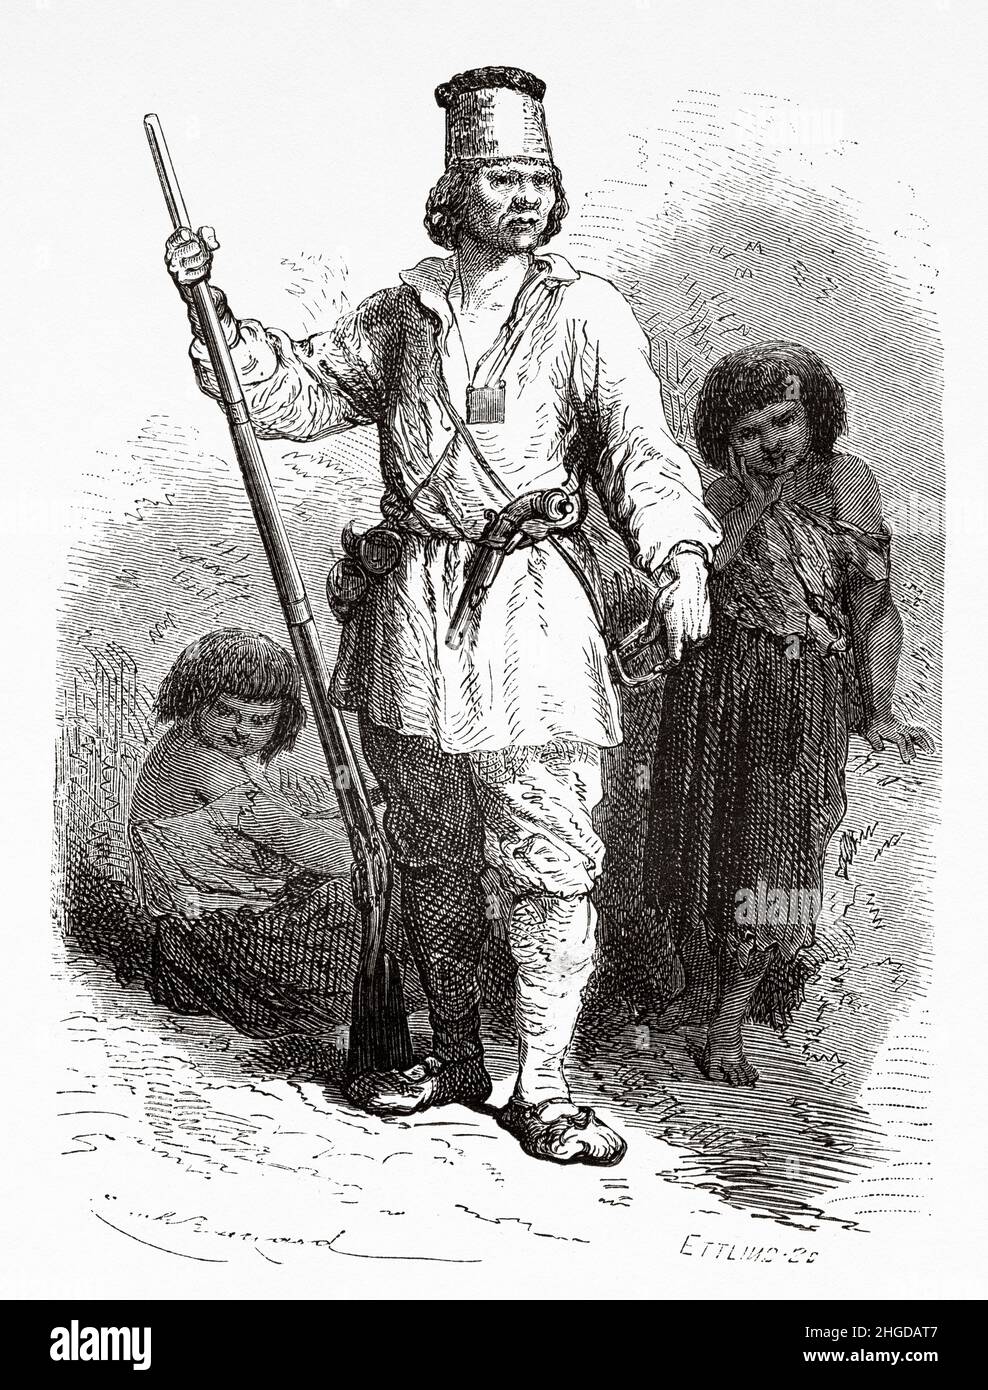 The interpreter and his family, southern Peru. South America. Old 19th century engraved illustration from Journey across South America by Paul Marcoy, Le Tour du Monde 1870 Stock Photo